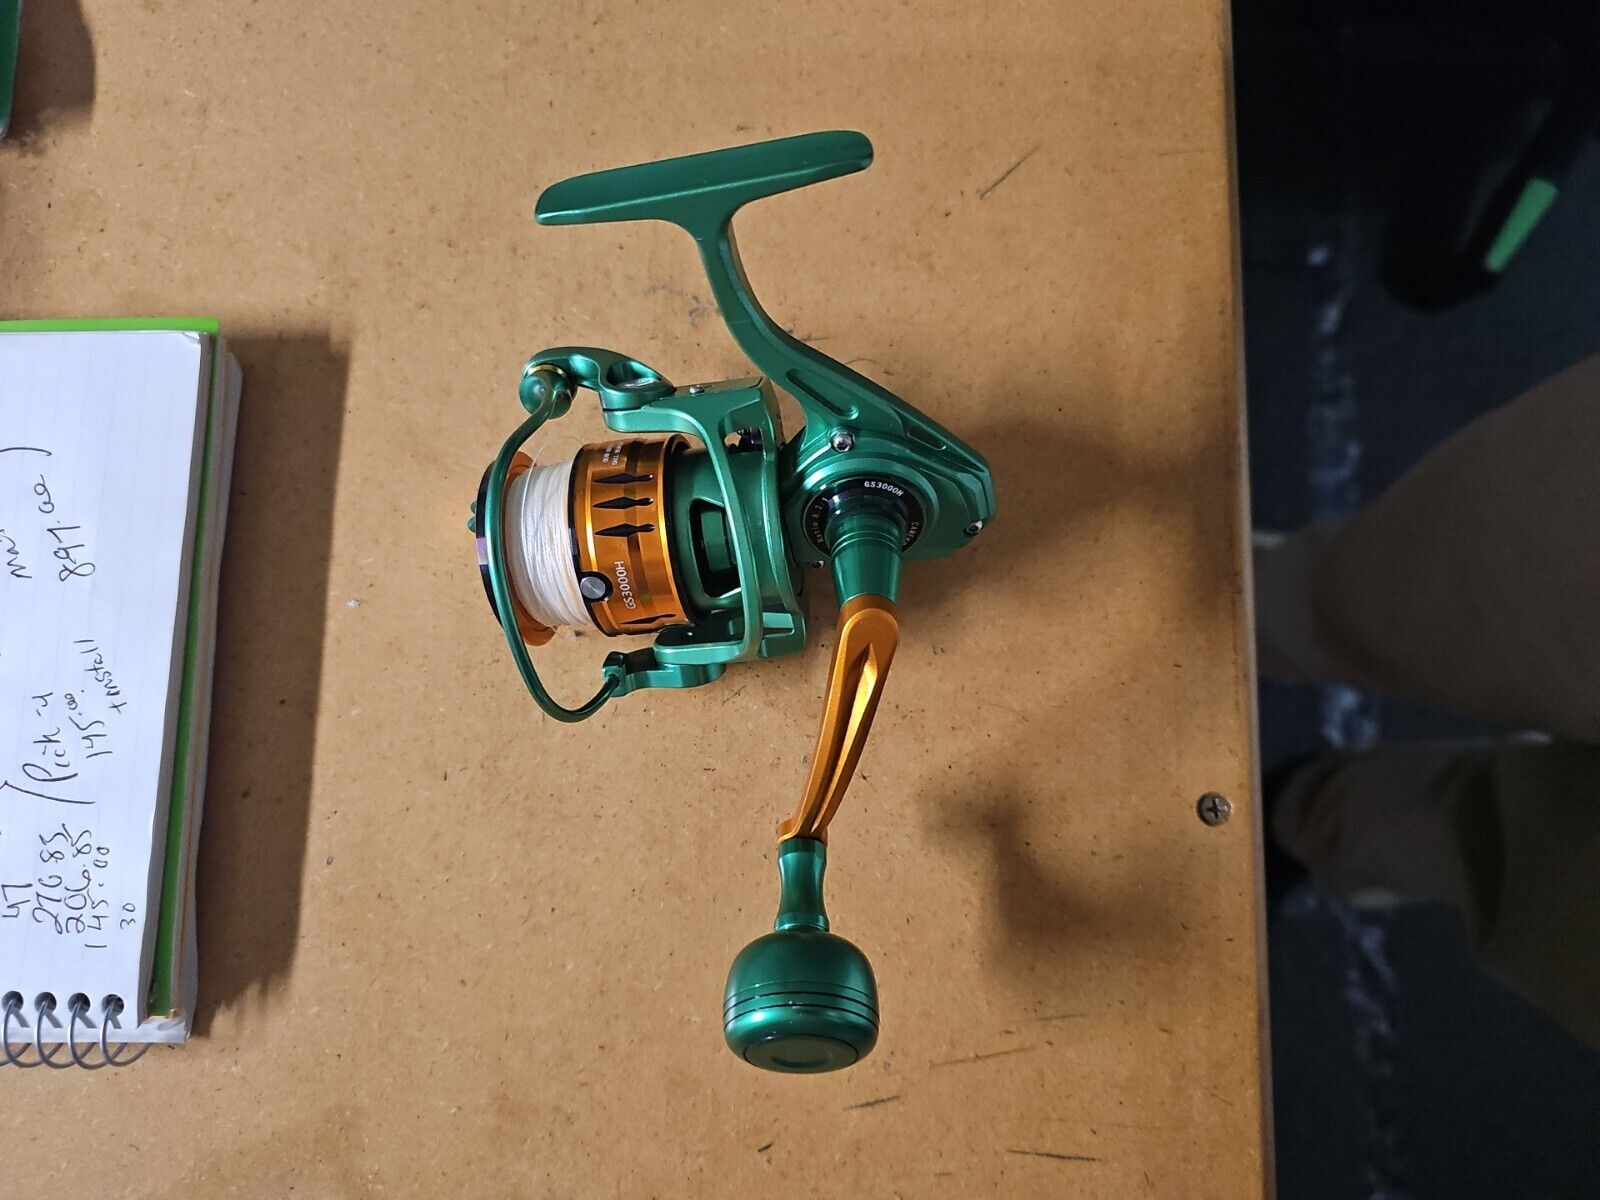 CAMEKOON Saltwater 8000/10000 Spinning Reels for Surf Fishing